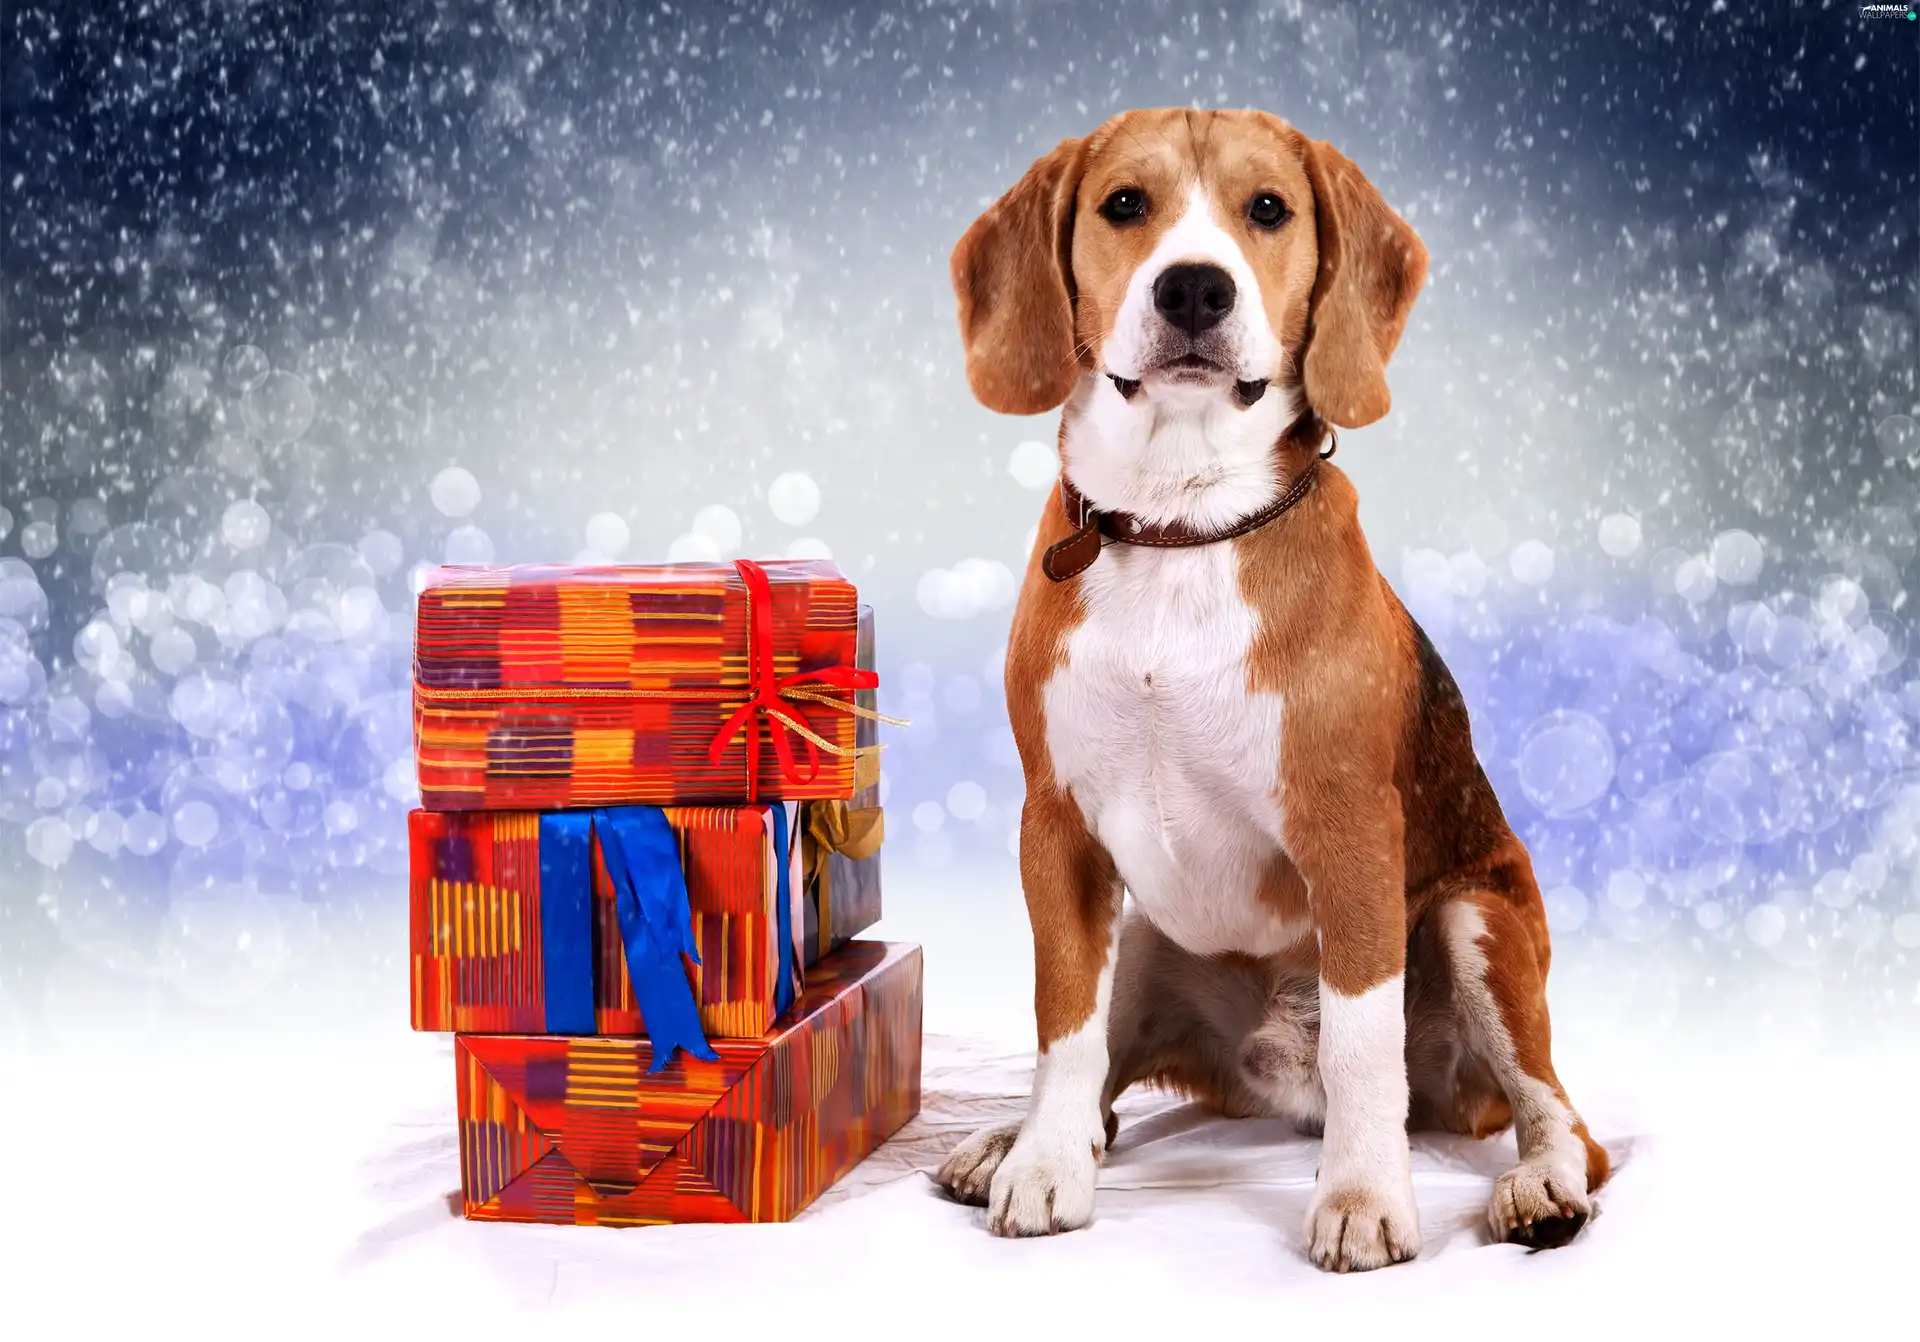 Beagle, incident, snow, gifts